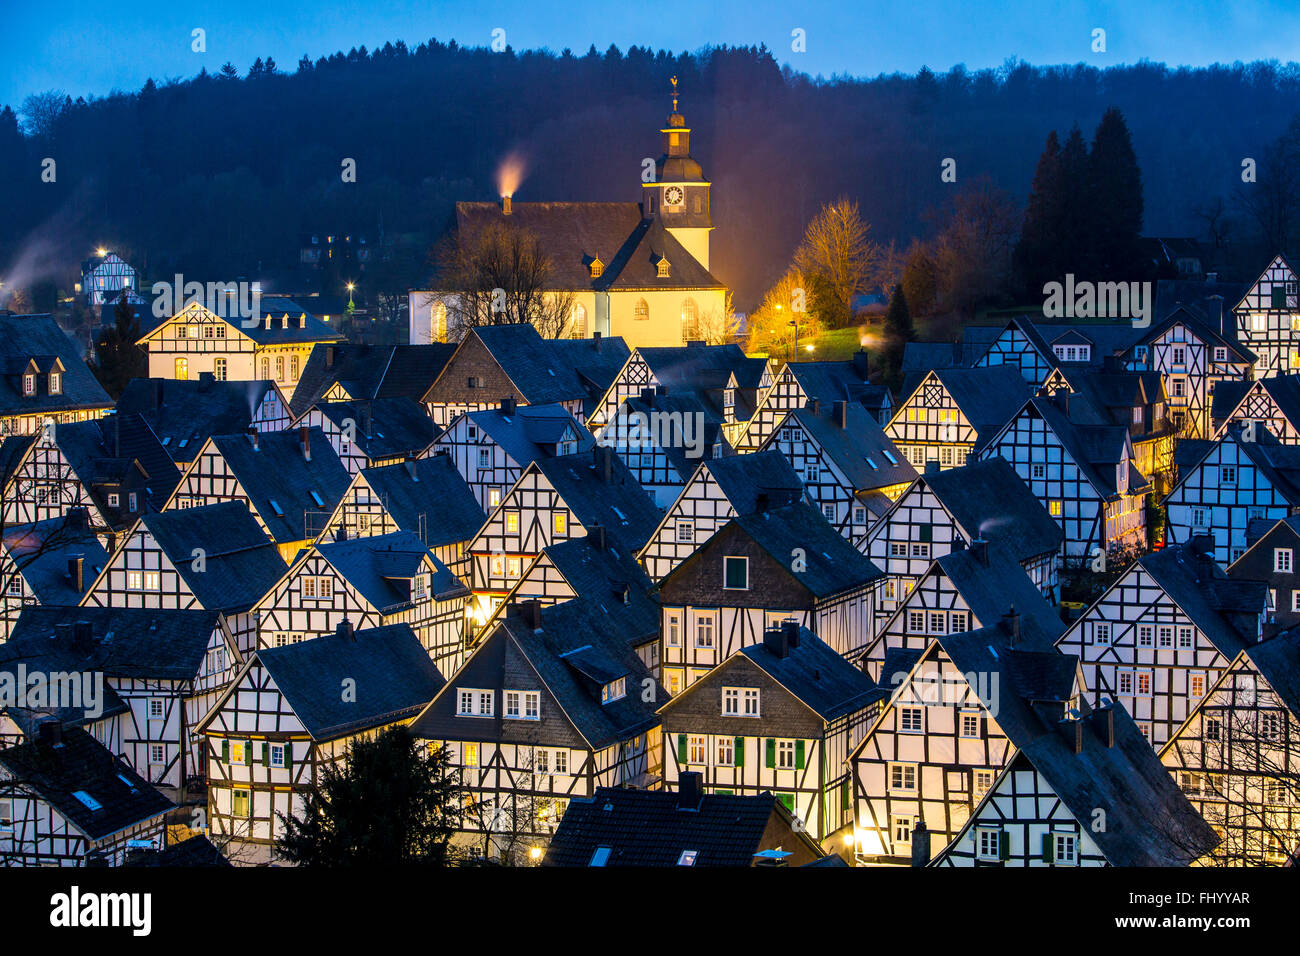 Historical old town, Tudor style houses, in Freudenberg, Germany, panoramic view of the city center, Stock Photo